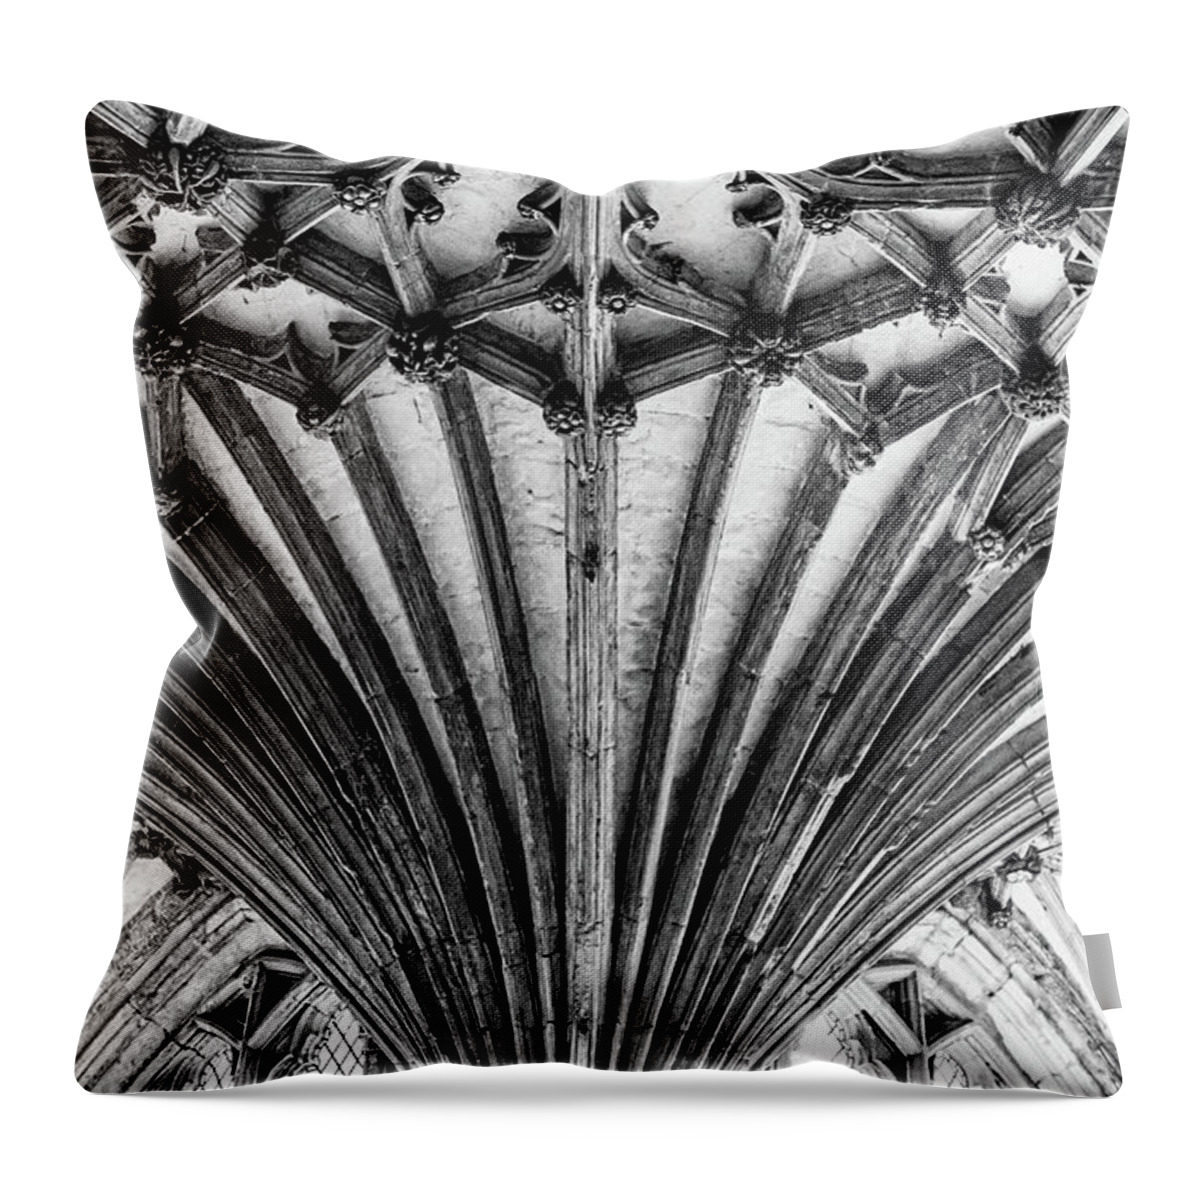 Landmark Throw Pillow featuring the photograph Canterbury Cathedral Cloister Ceiling by Shirley Mitchell